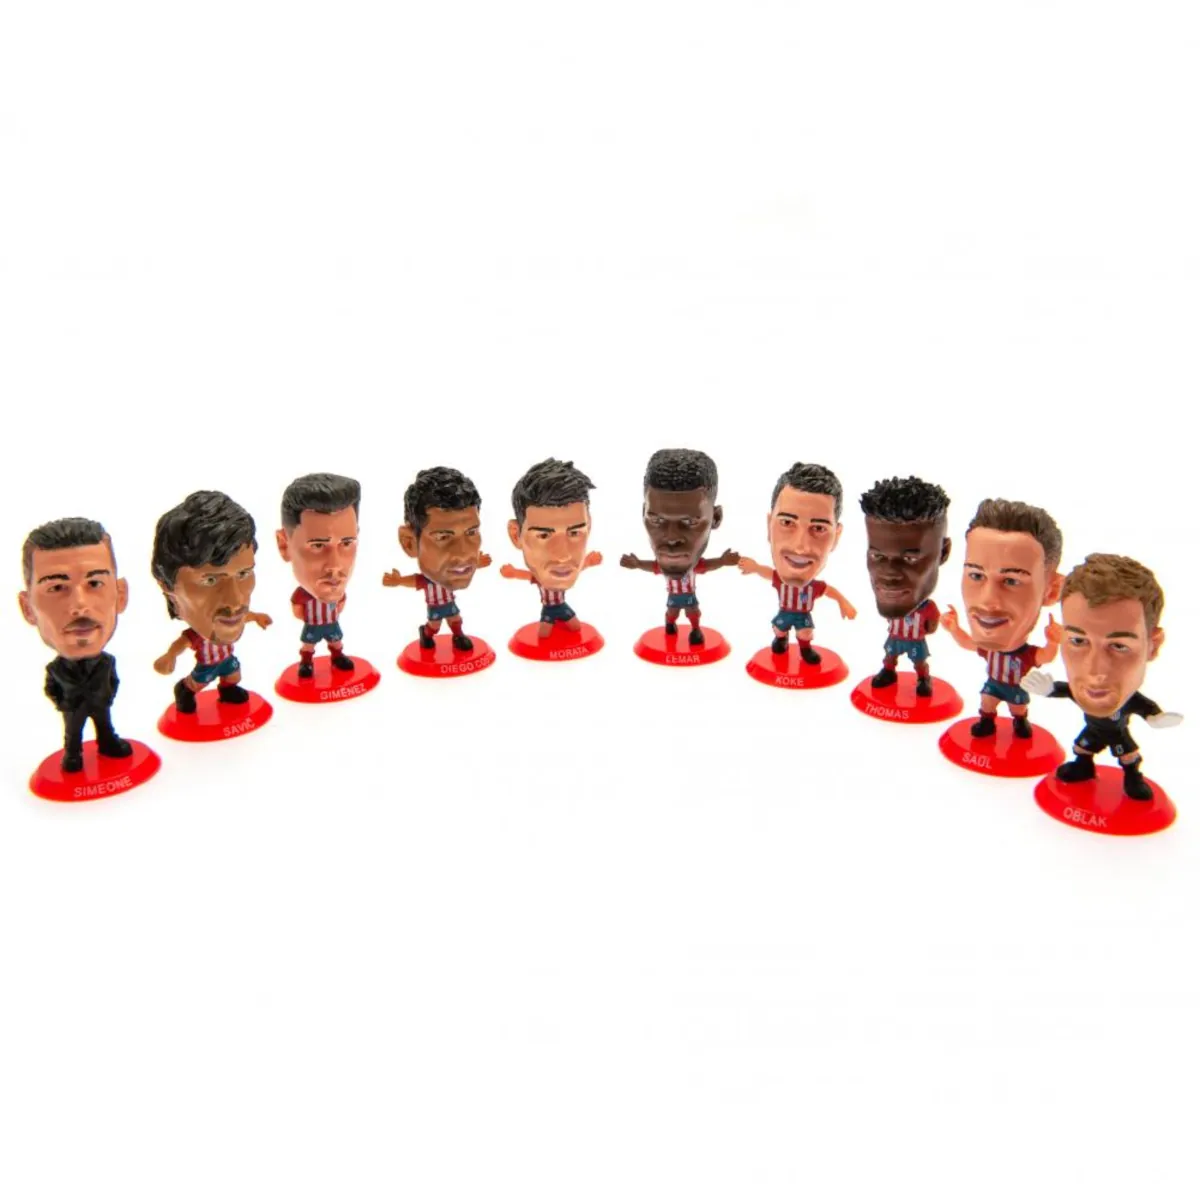 162487 Atletico Madrid F.C. SoccerStarz 10 Player Team Pack Collectable Figures